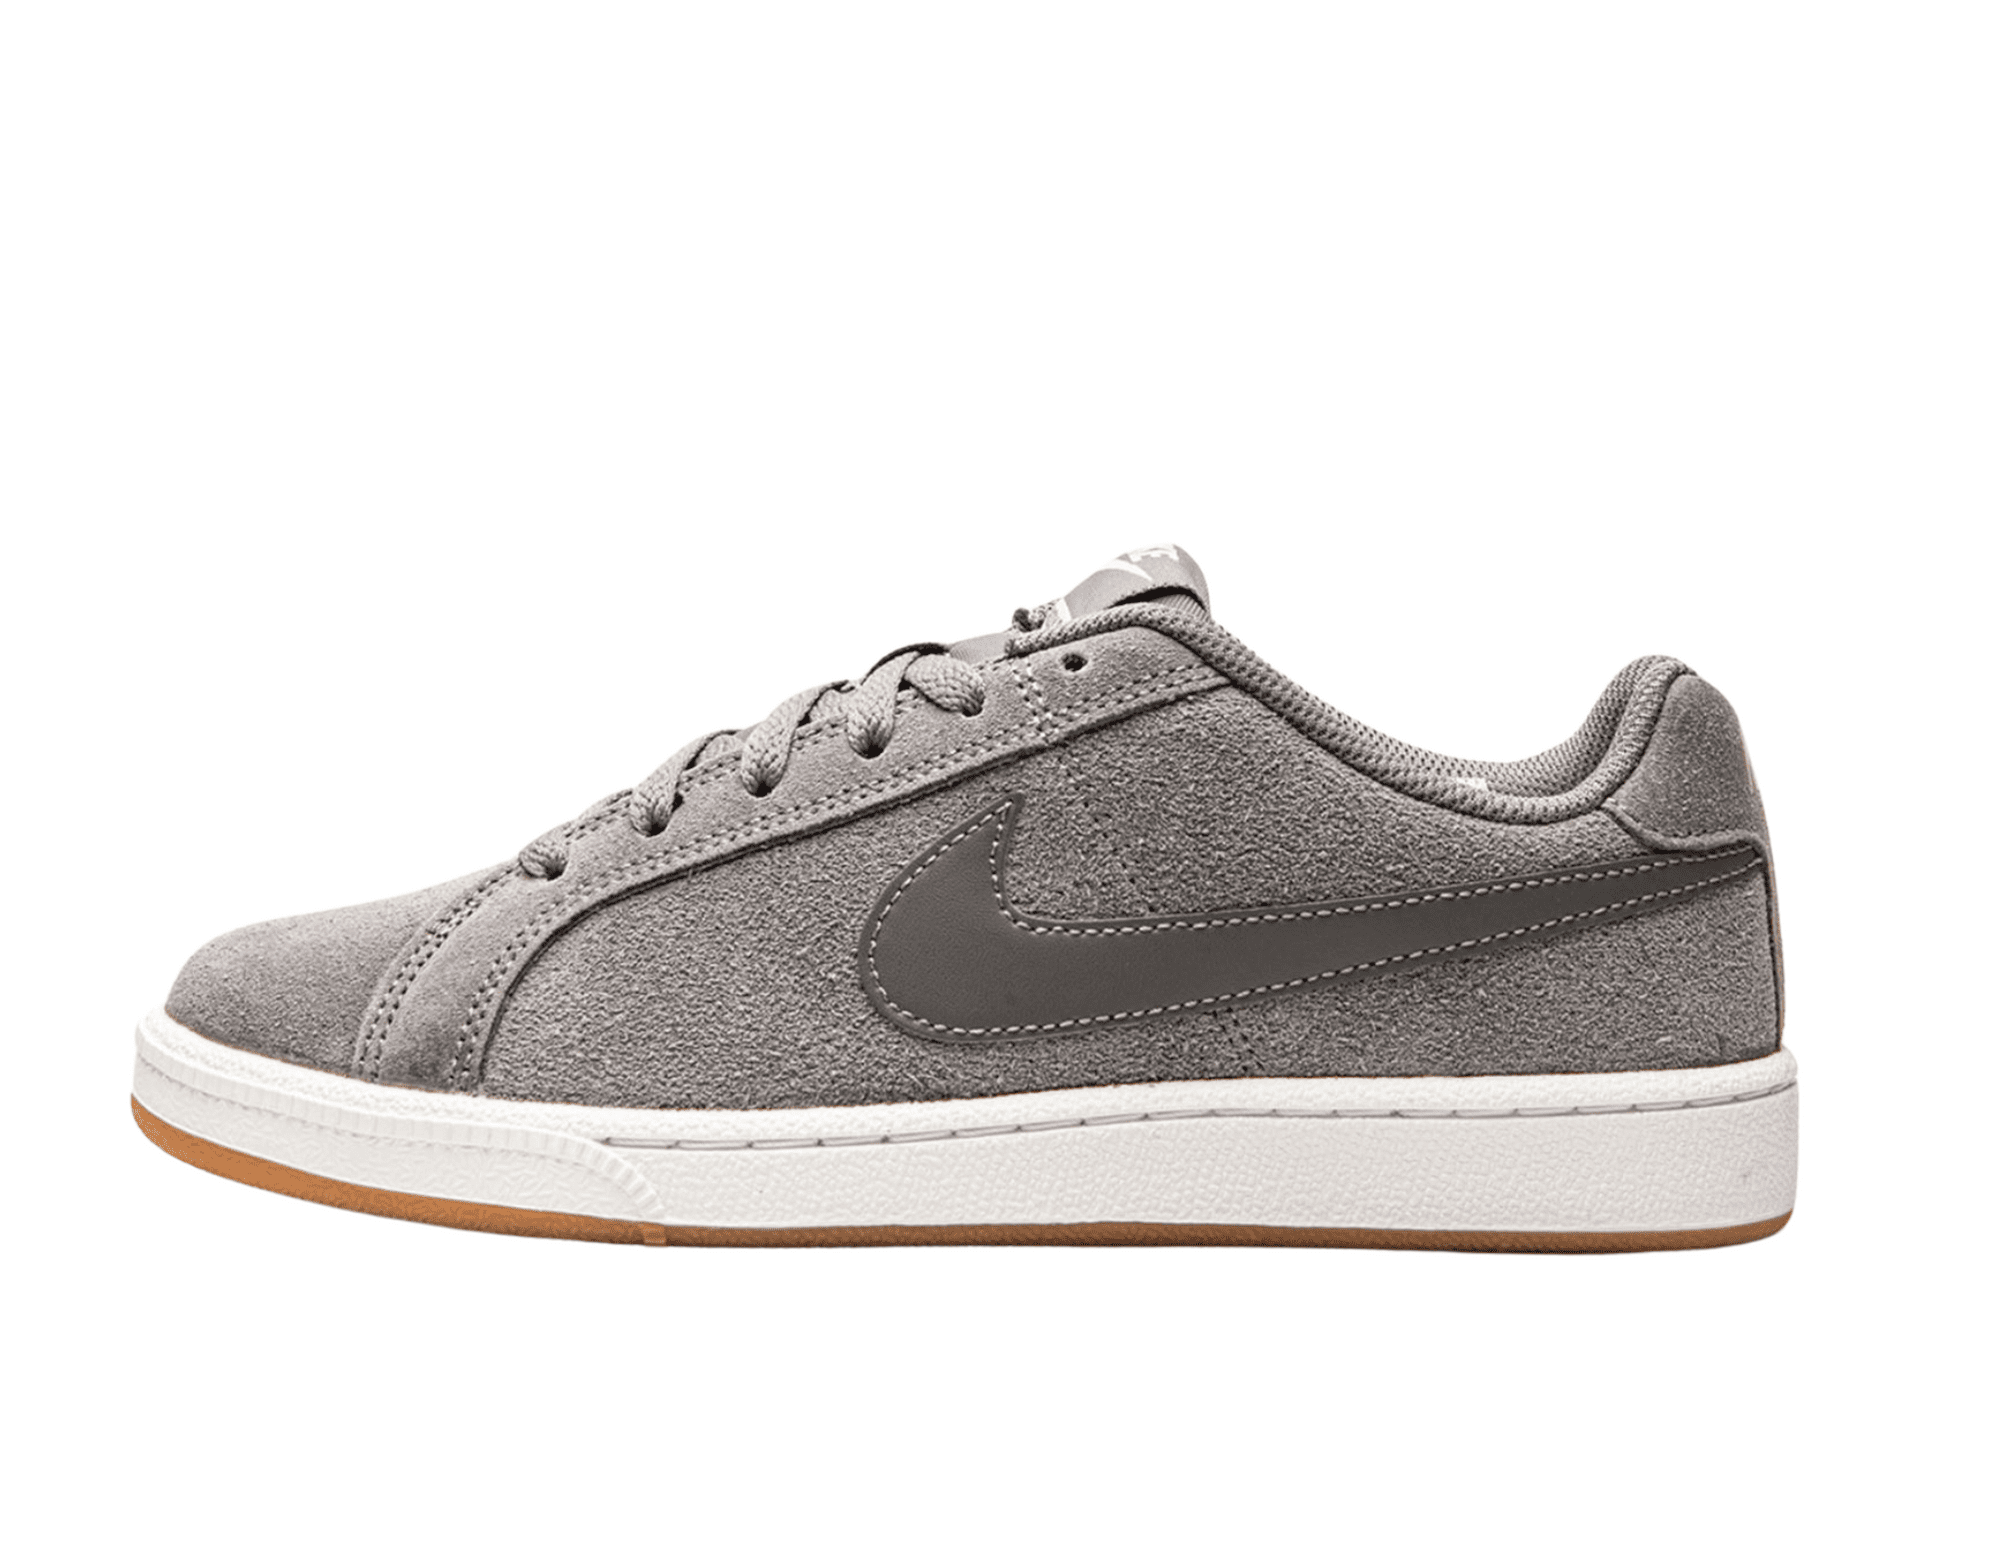 Nike Women's Court Royale Suede Sneakers -